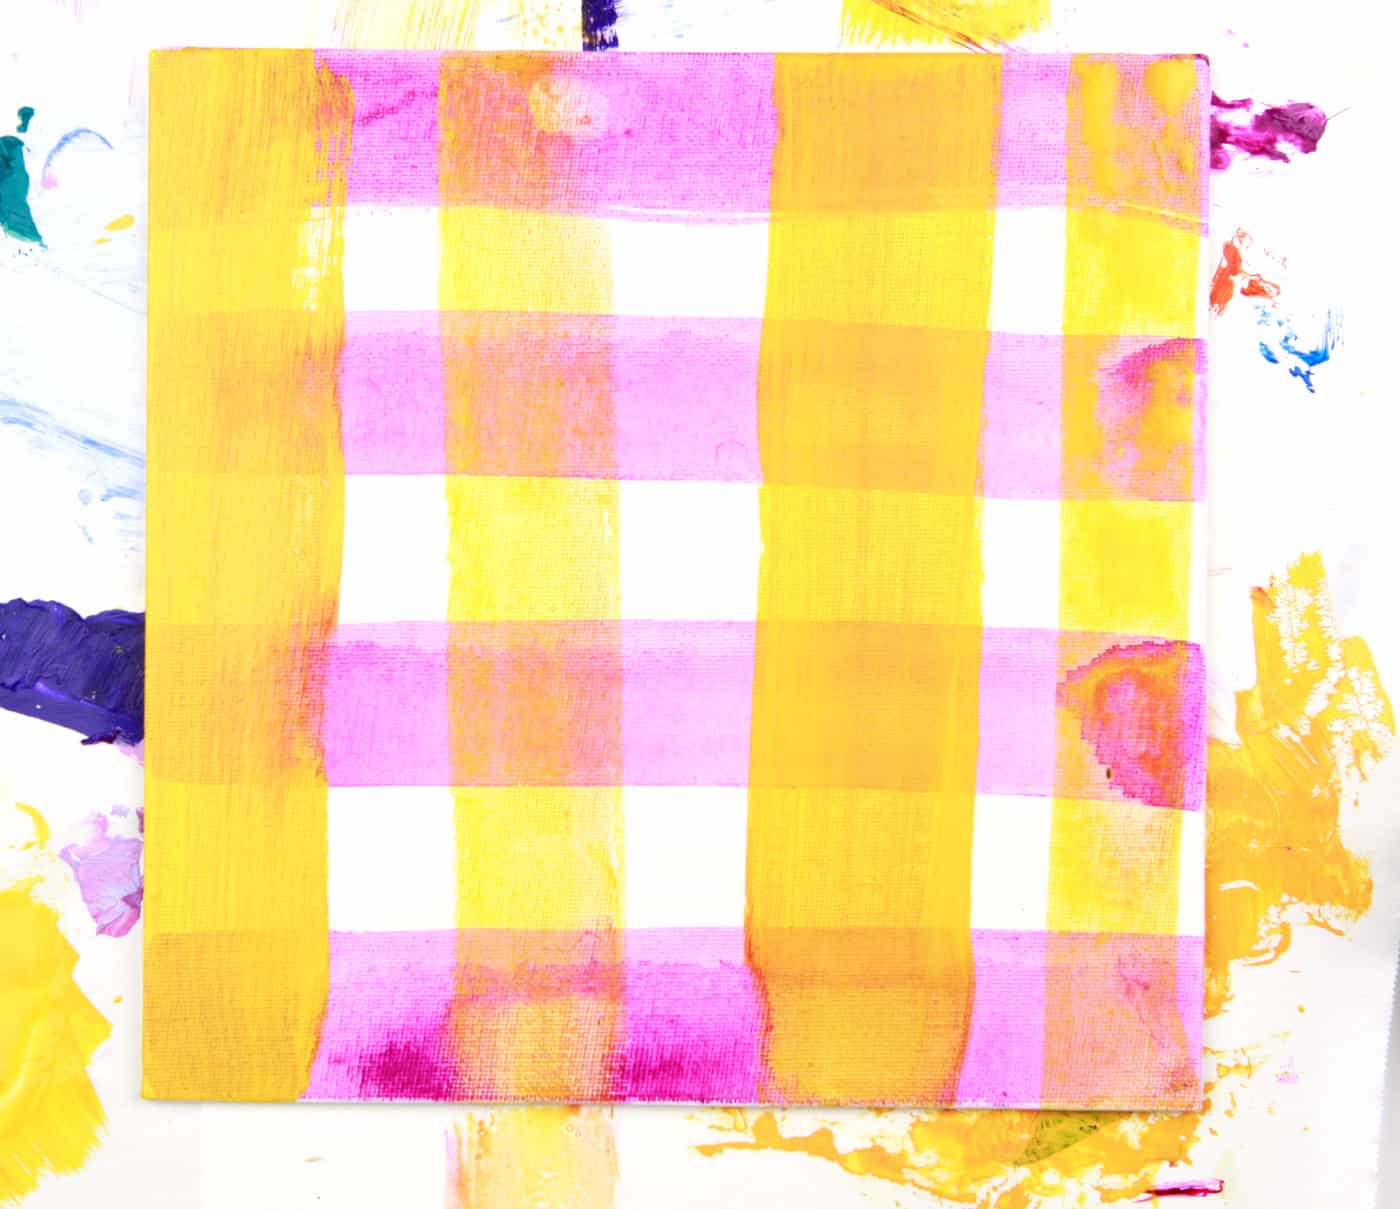 yellow and pink washes of acrylic paint in a plaid design